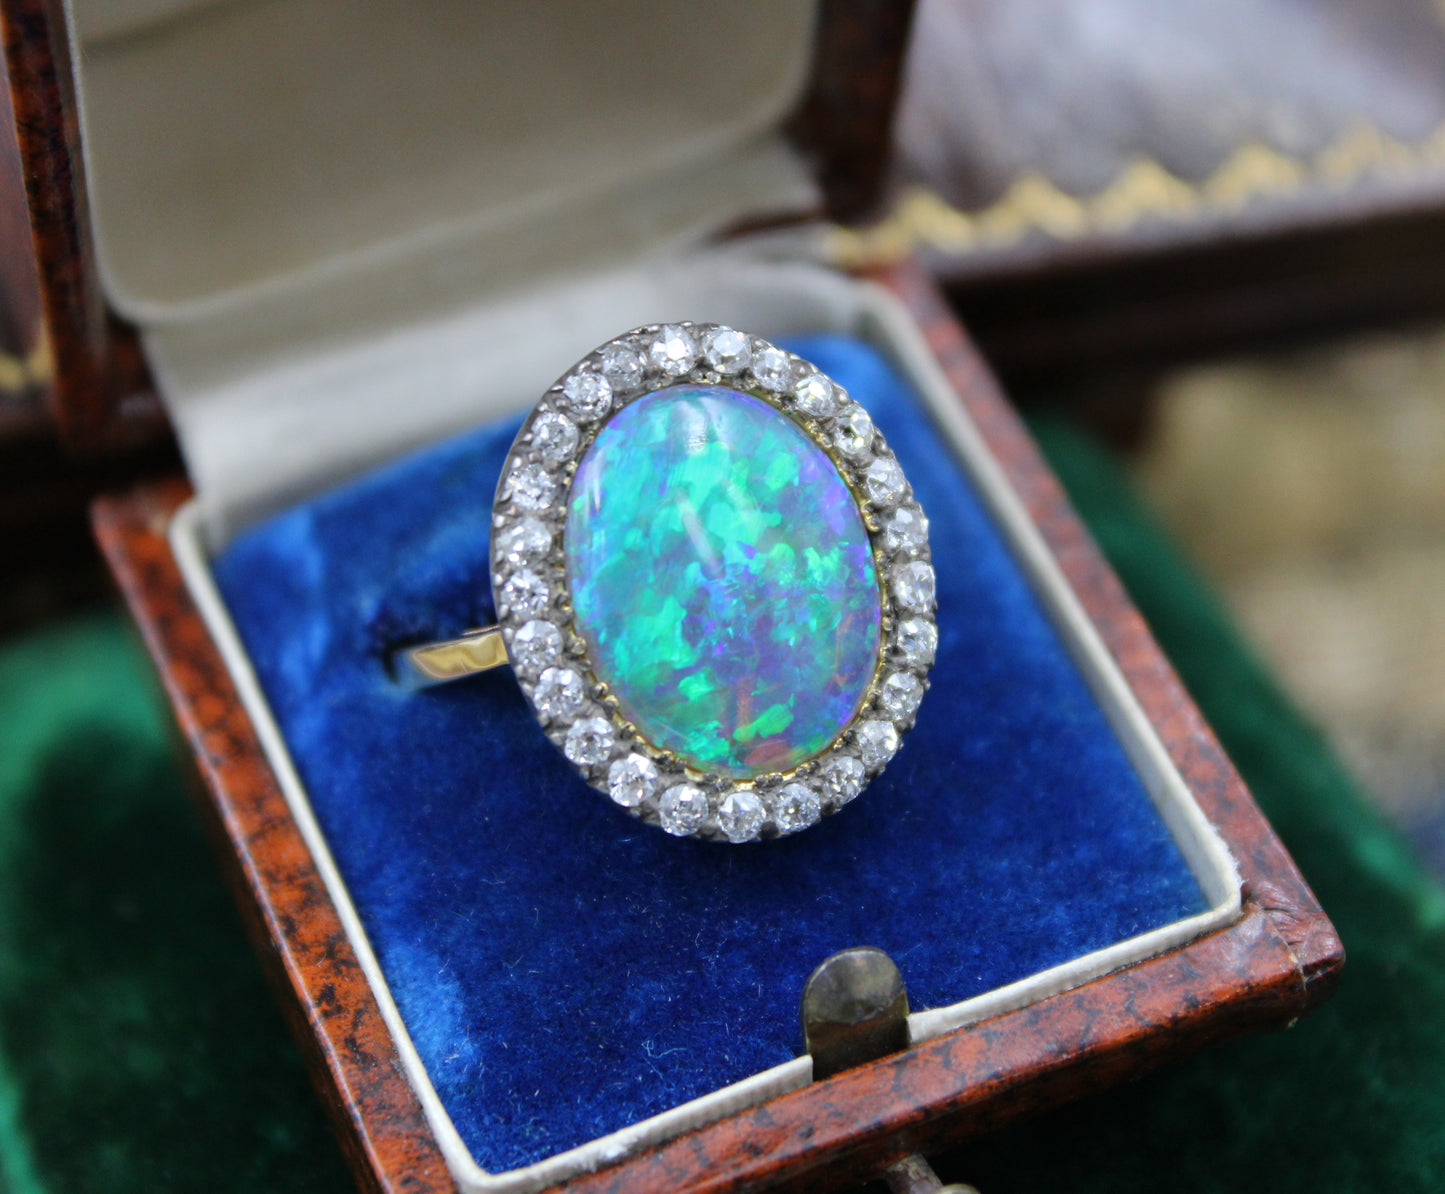 An Opal & DIamond Cluster Ring set in 14ct Yellow Gold & Silver, Continental, Circa 1905 - Robin Haydock Antiques